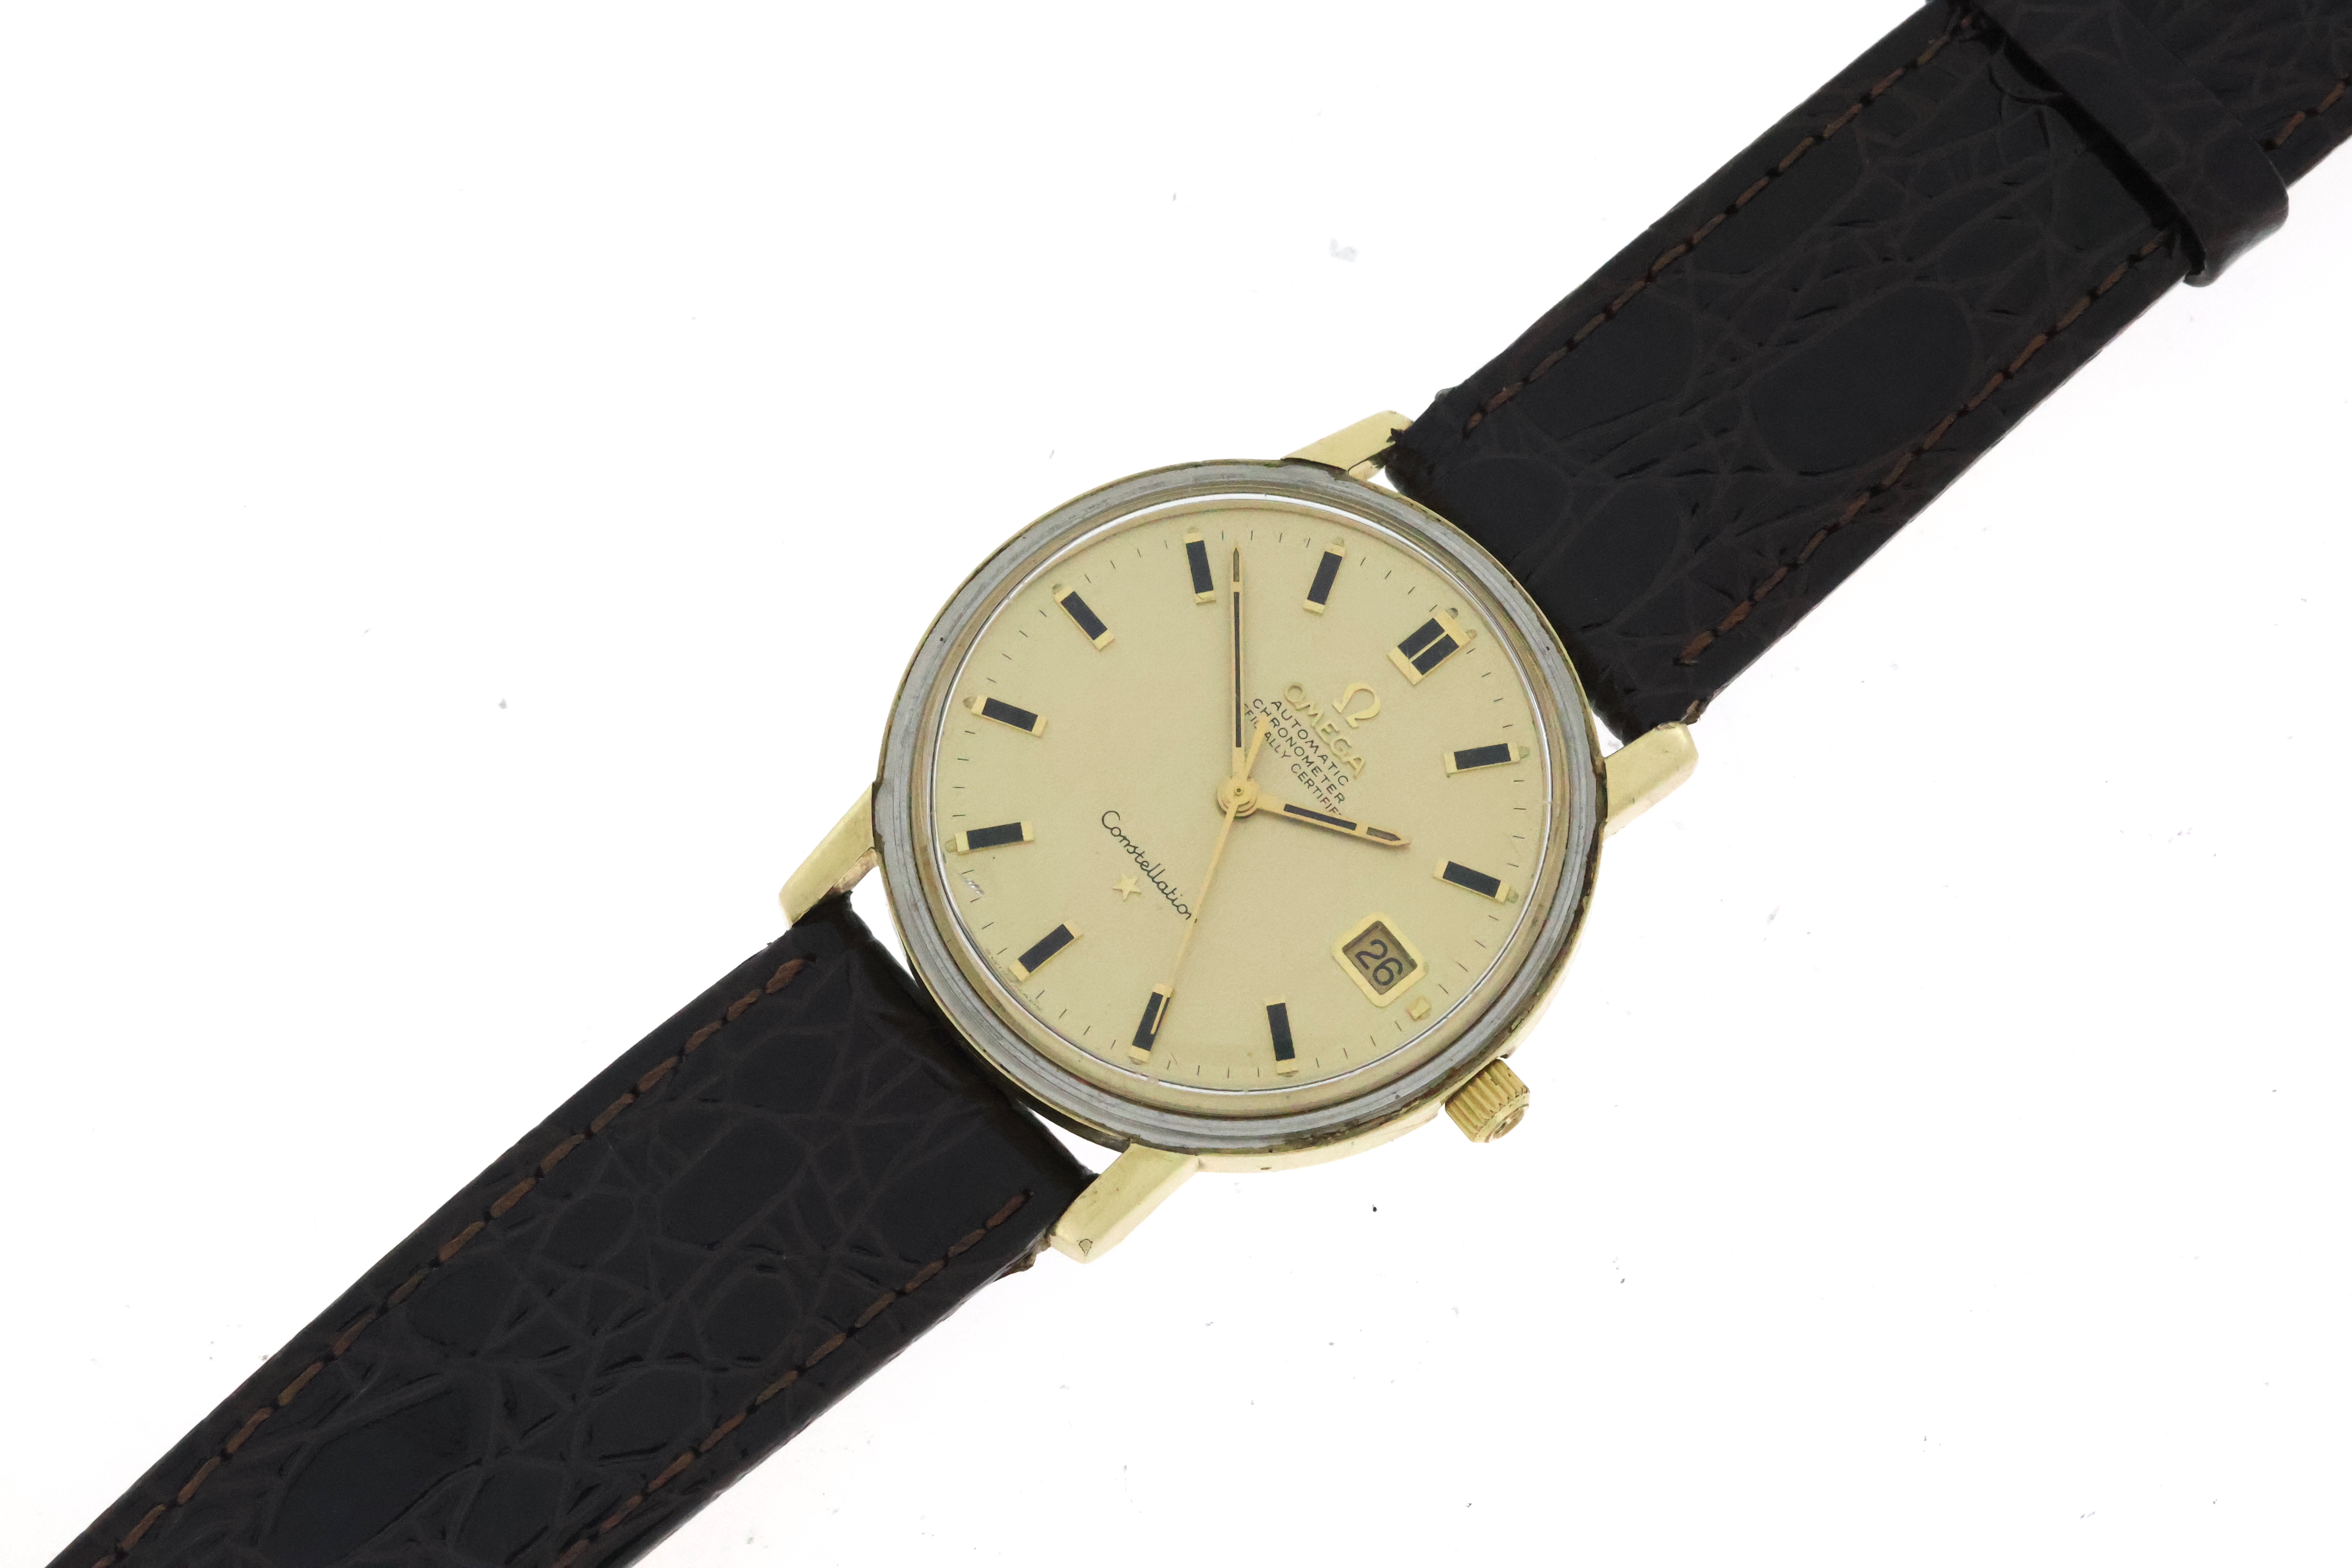 Vintage Omega Constellation Date Automatic - Image 2 of 4